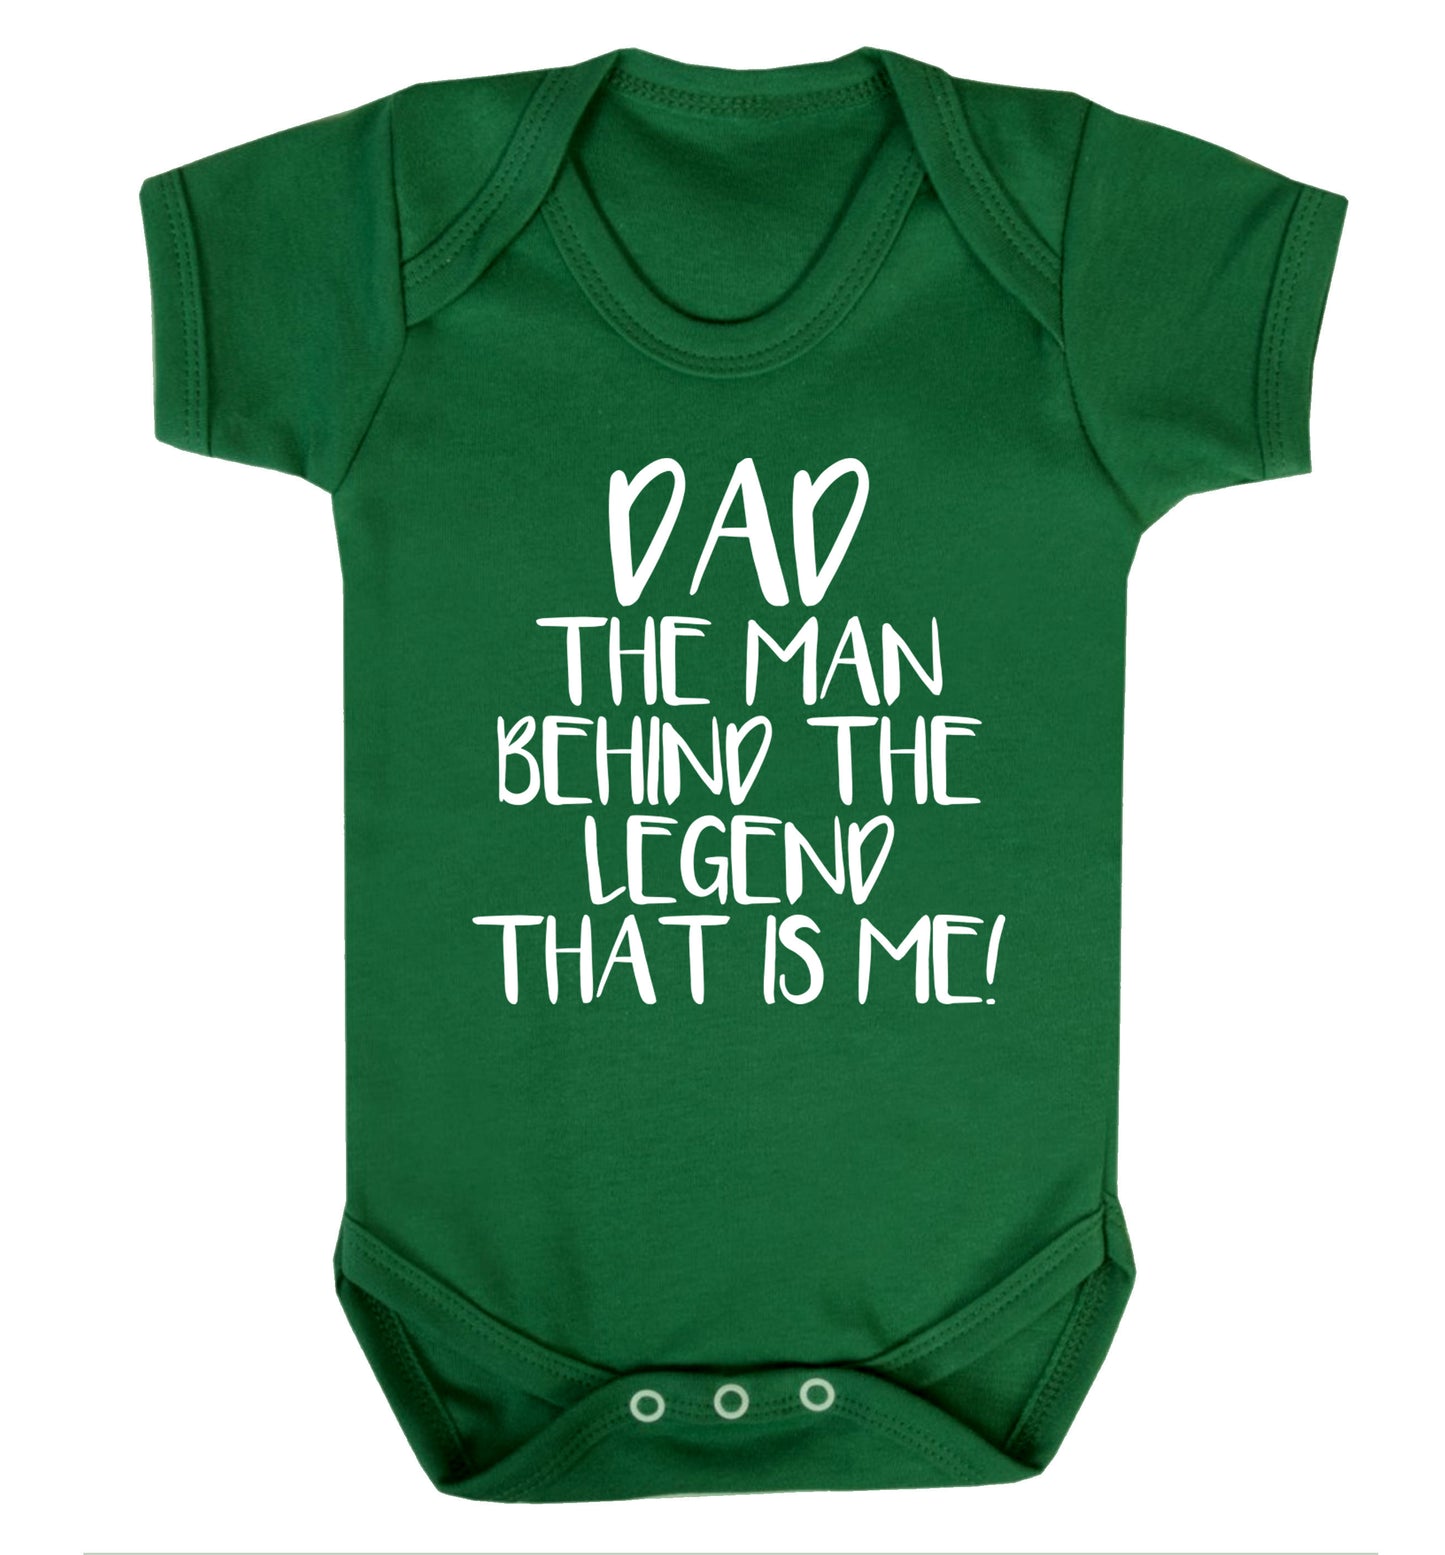 Dad the man behind the legend that is me! Baby Vest green 18-24 months